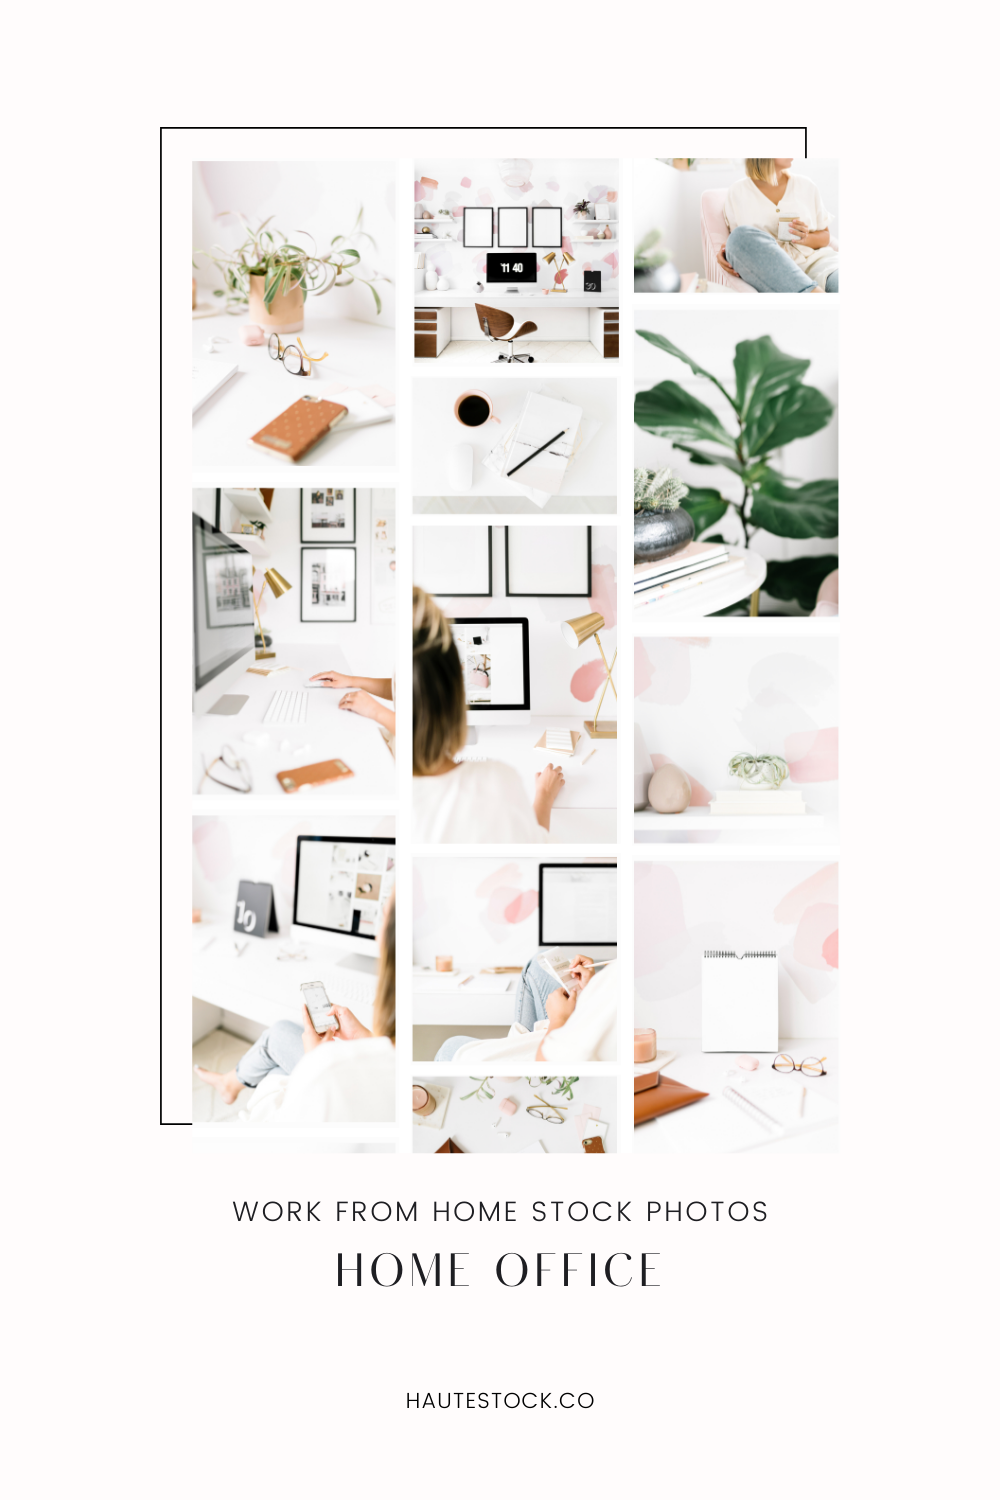 Pink home office styled stock photos for women entrepreneurs